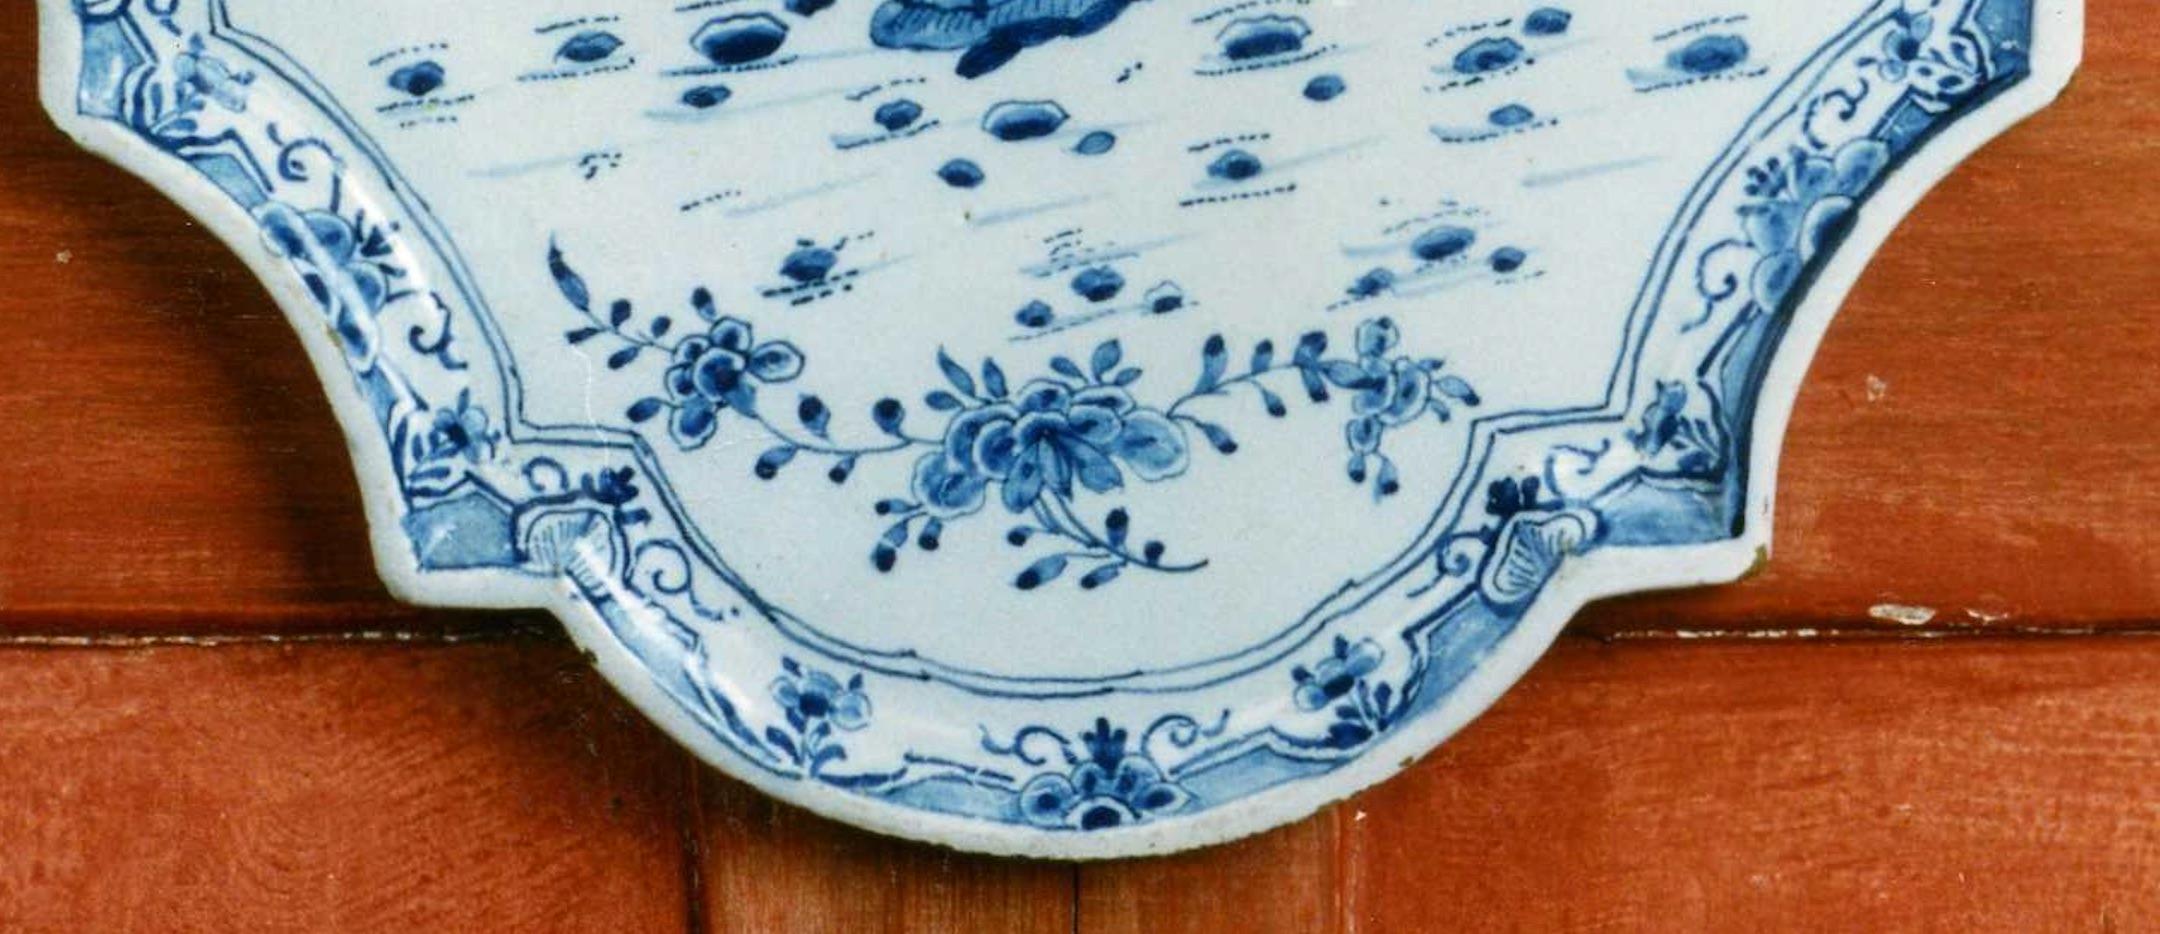 Earthenware Wall Plaque Dutch, 18th Century, Delftware, Blue and White, Chinoiserie, Pottery For Sale